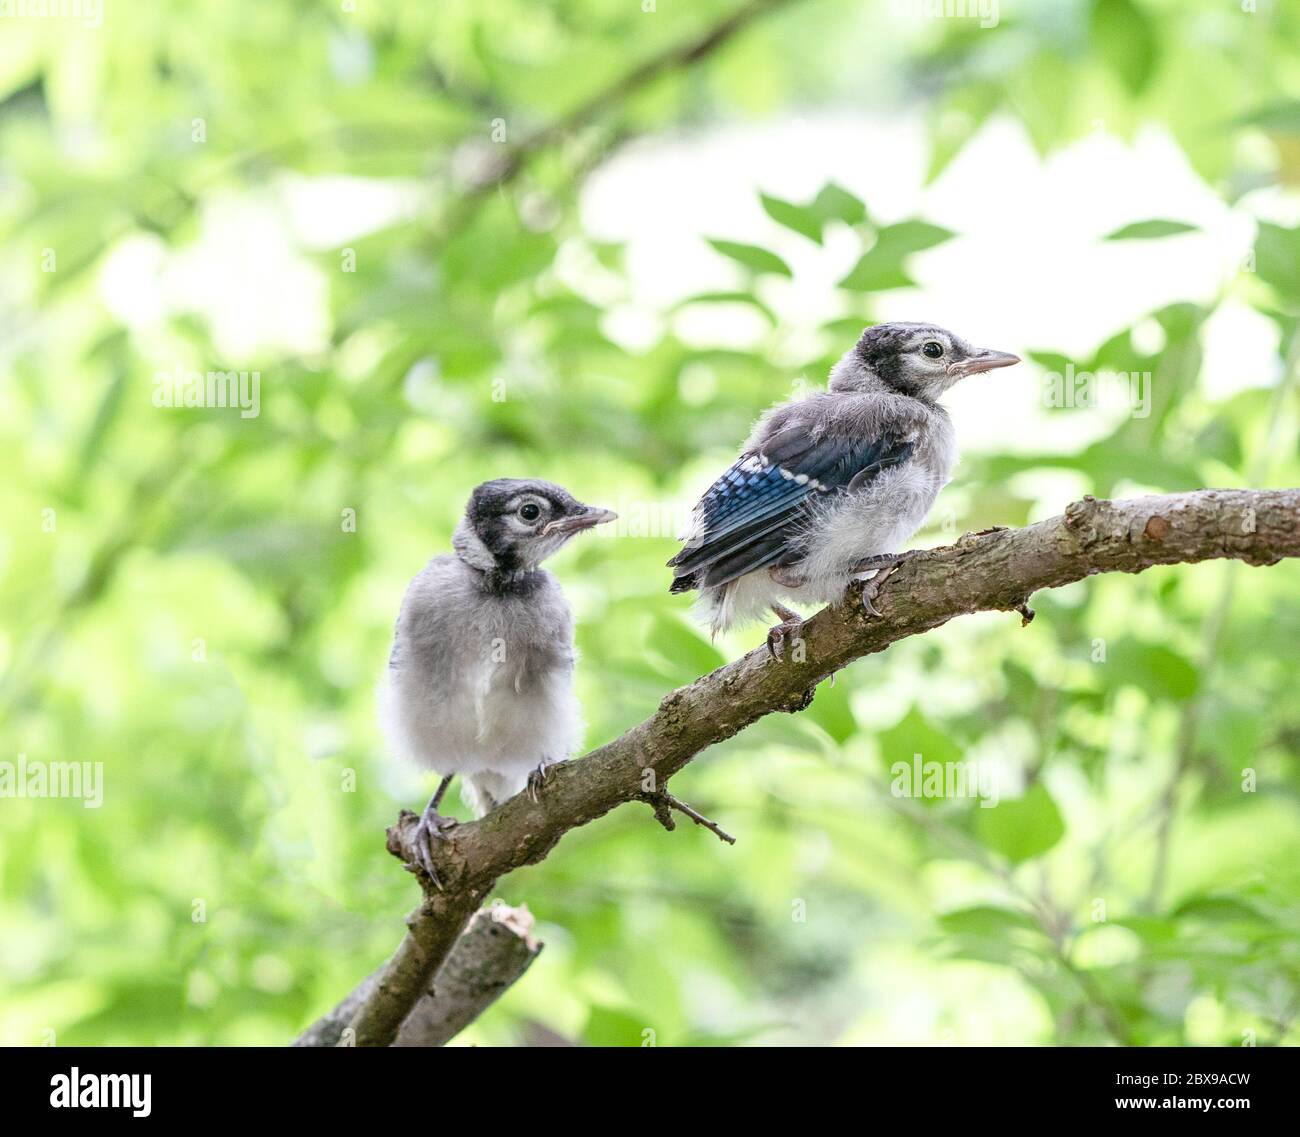 Two baby blue jays perched on tree branch. Stock Photo